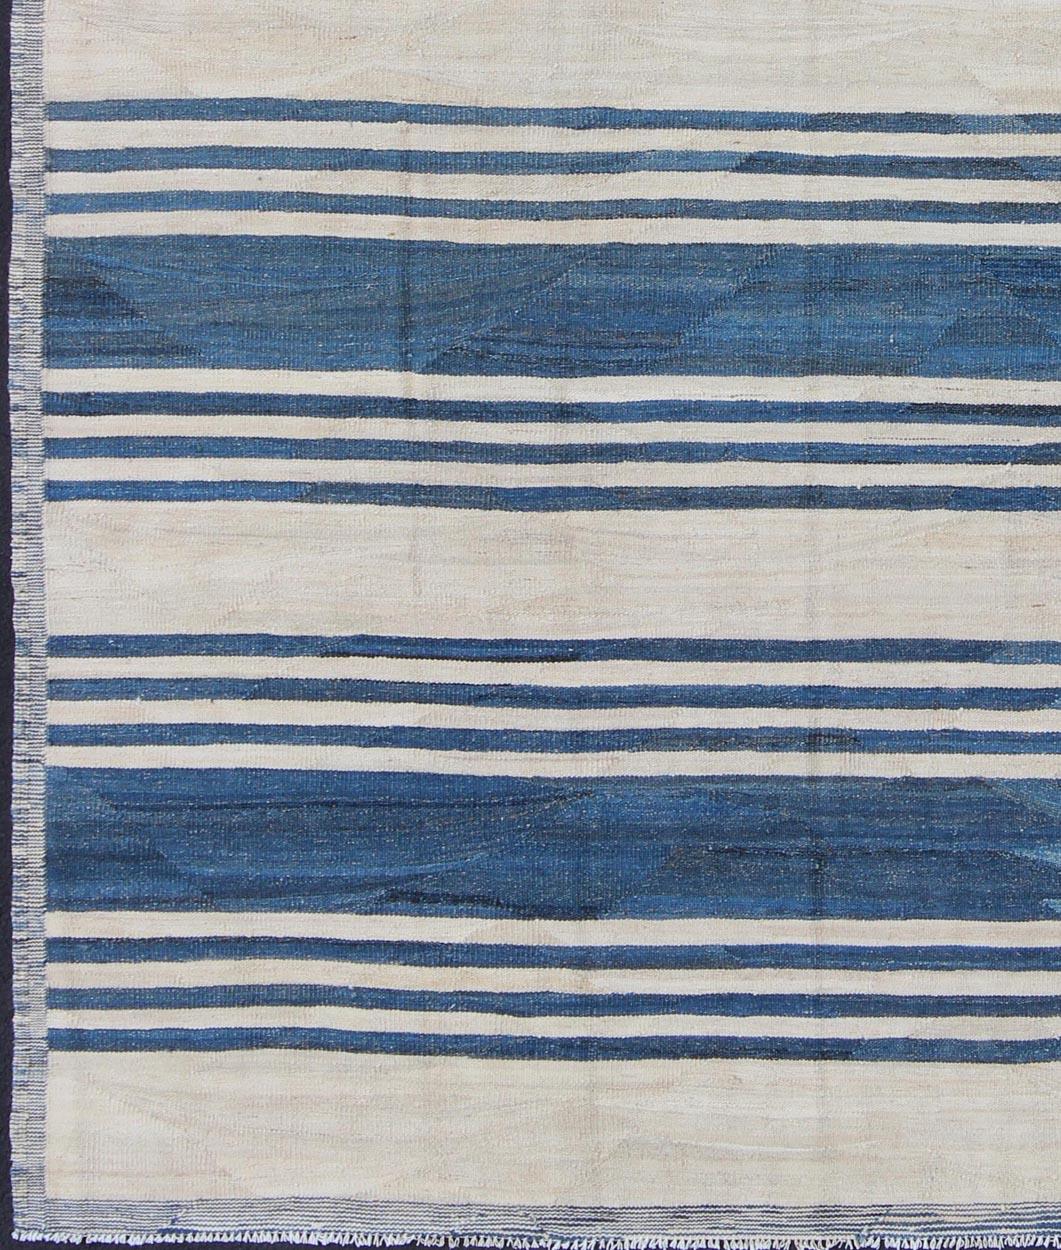 Casual flat-weave Kilim rug with blue color in Classic Stripe design, rug afg-6369, country of origin / type: Afghanistan / Kilim

This vibrant Kilim rug features a Classic stripe design, perfectly suited for casual and easy interiors, such as